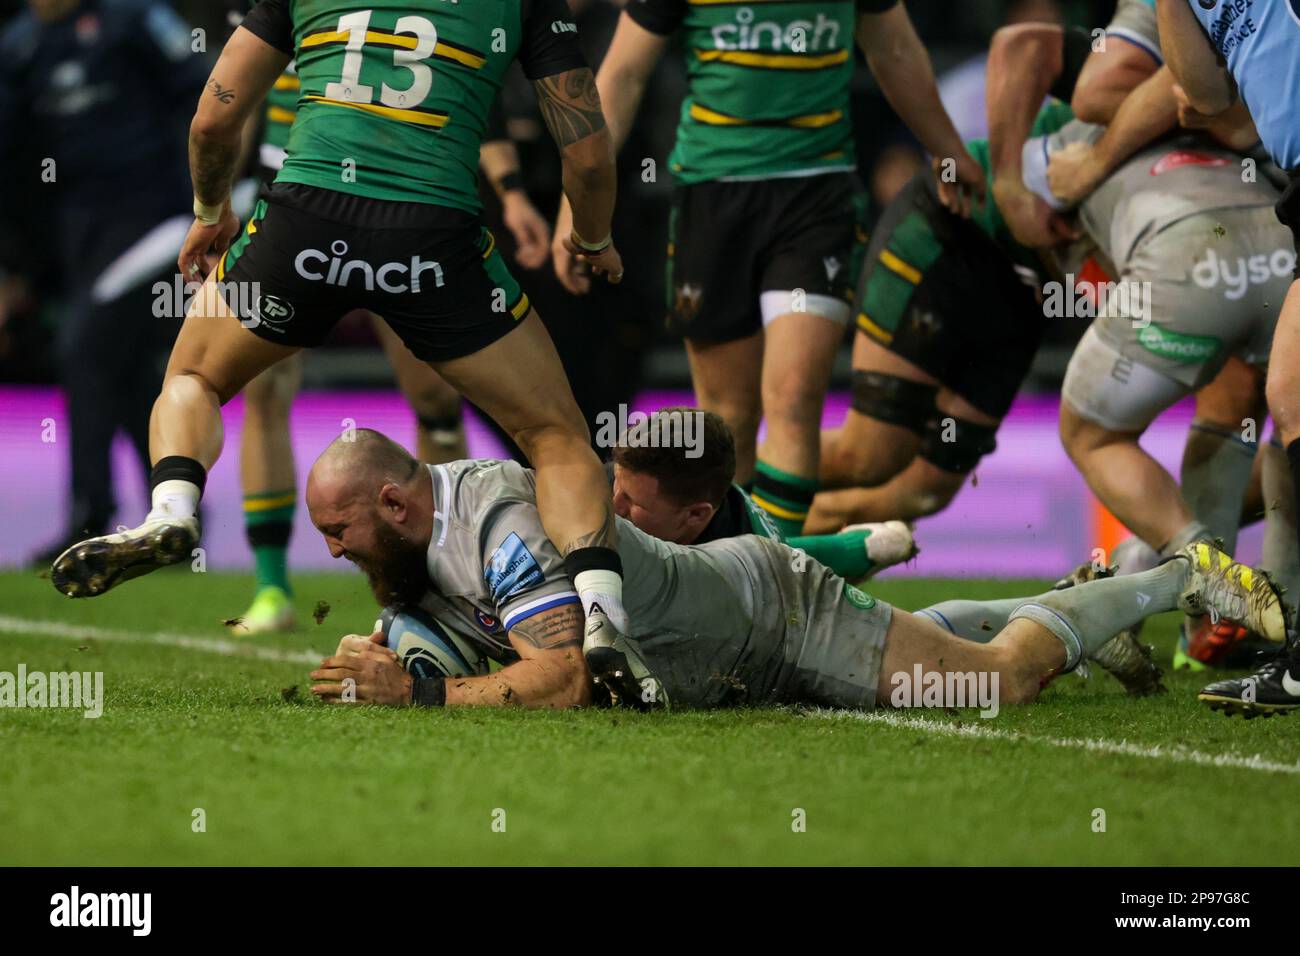 Tom Dunn of Bath Rugby scores a try during the Gallagher Premiership match Northampton Saints vs Bath Rugby at Franklins Gardens, Northampton, United Kingdom, 10th March 2023 (Photo by Nick Browning/News Images